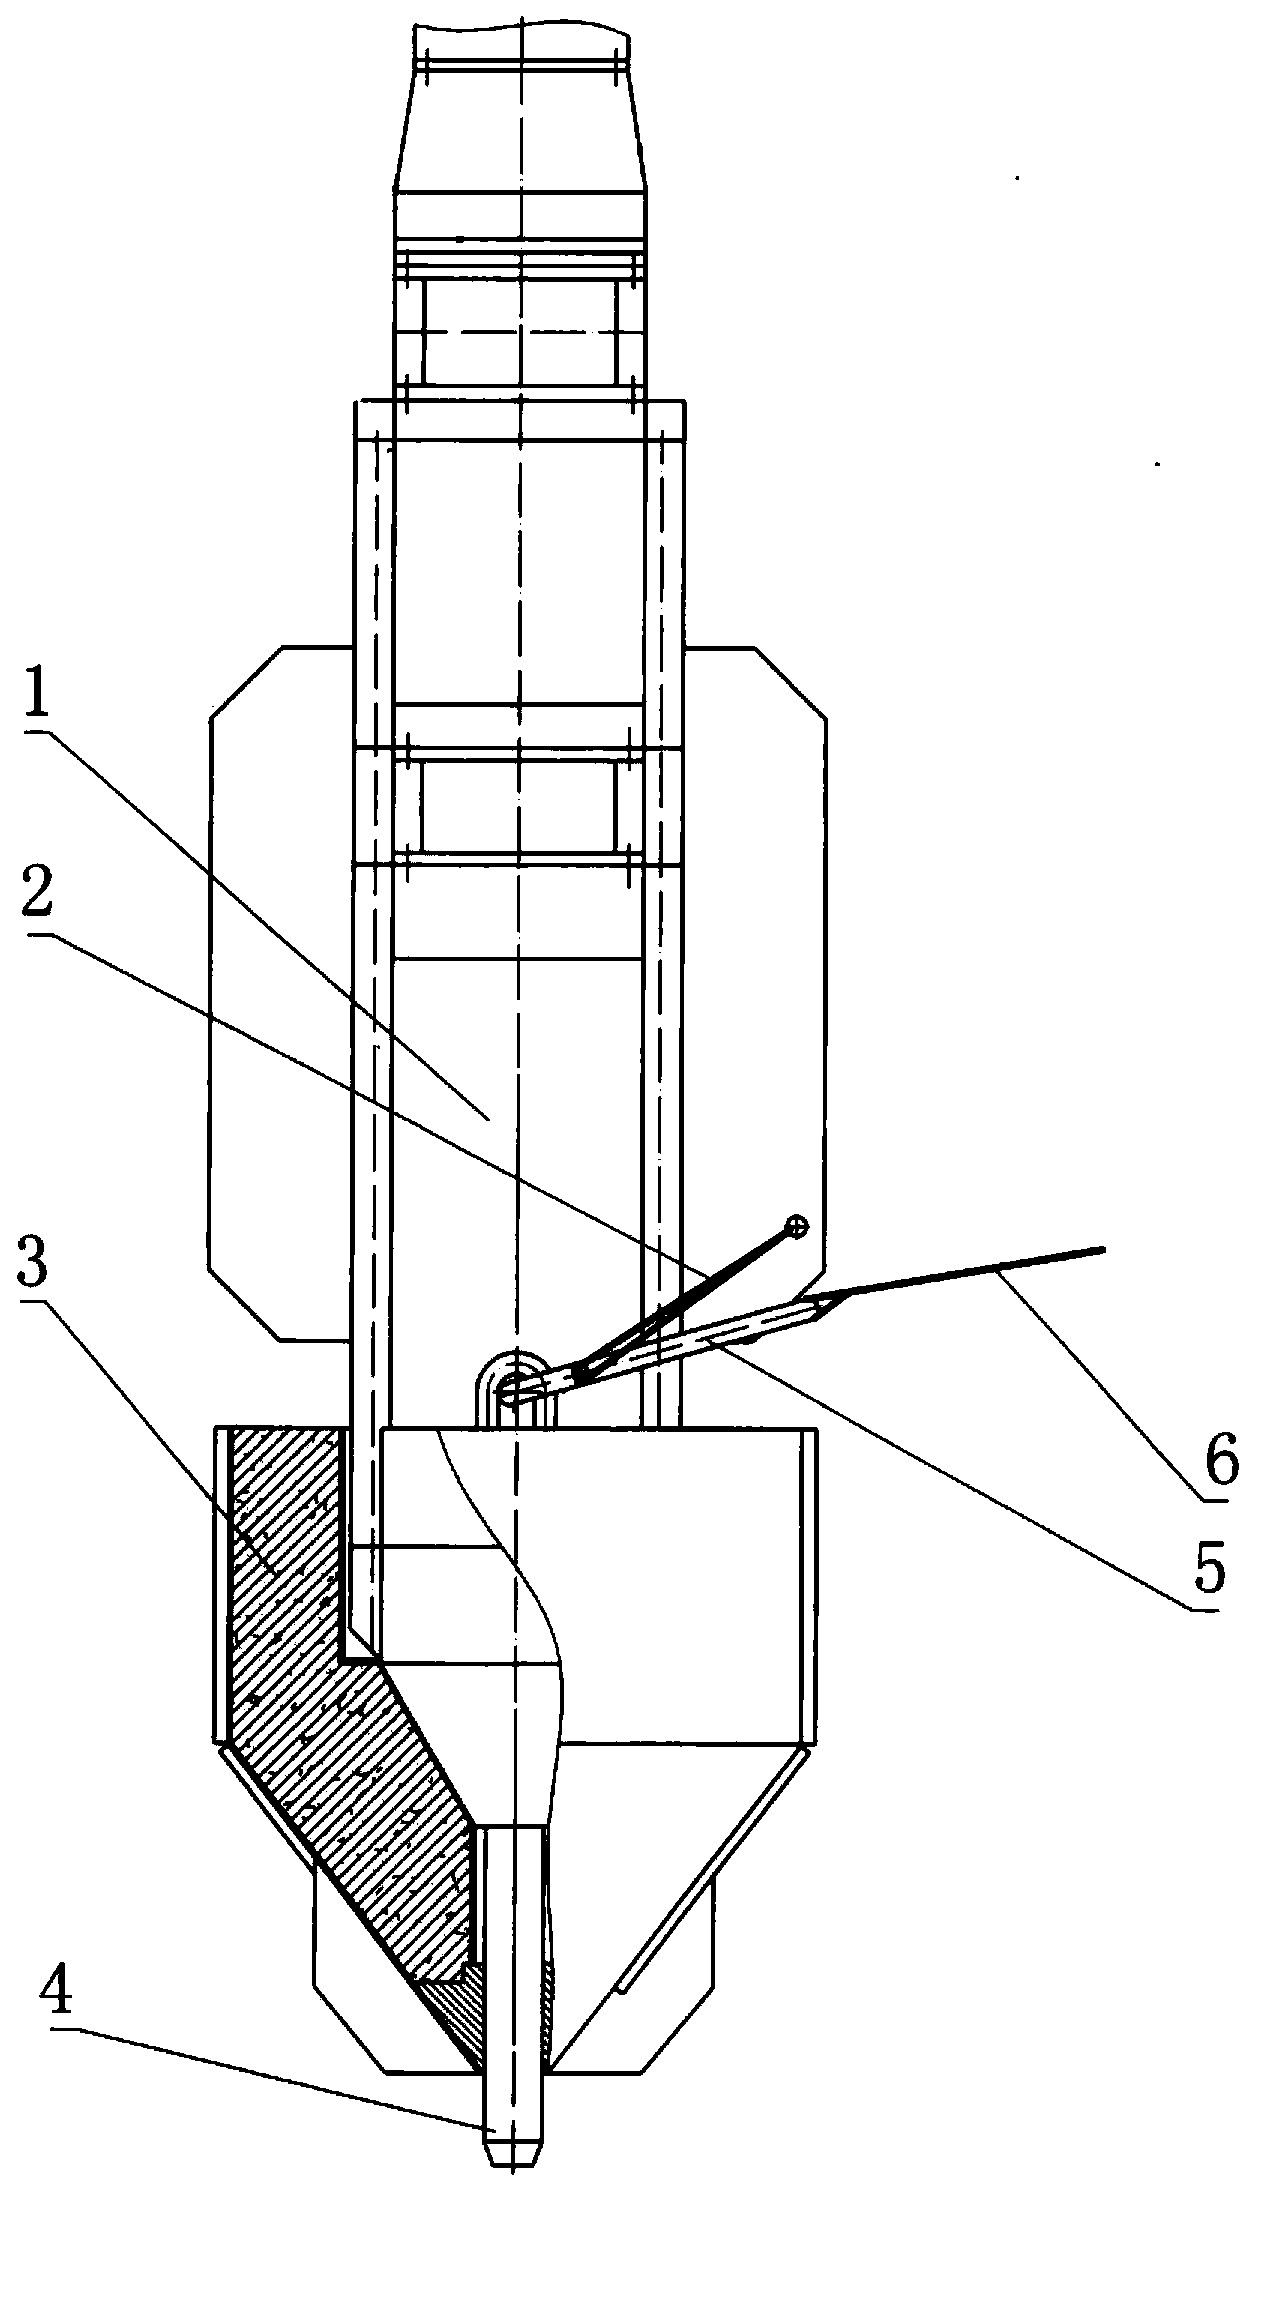 Method for releasing deepwater net cage anchorage system